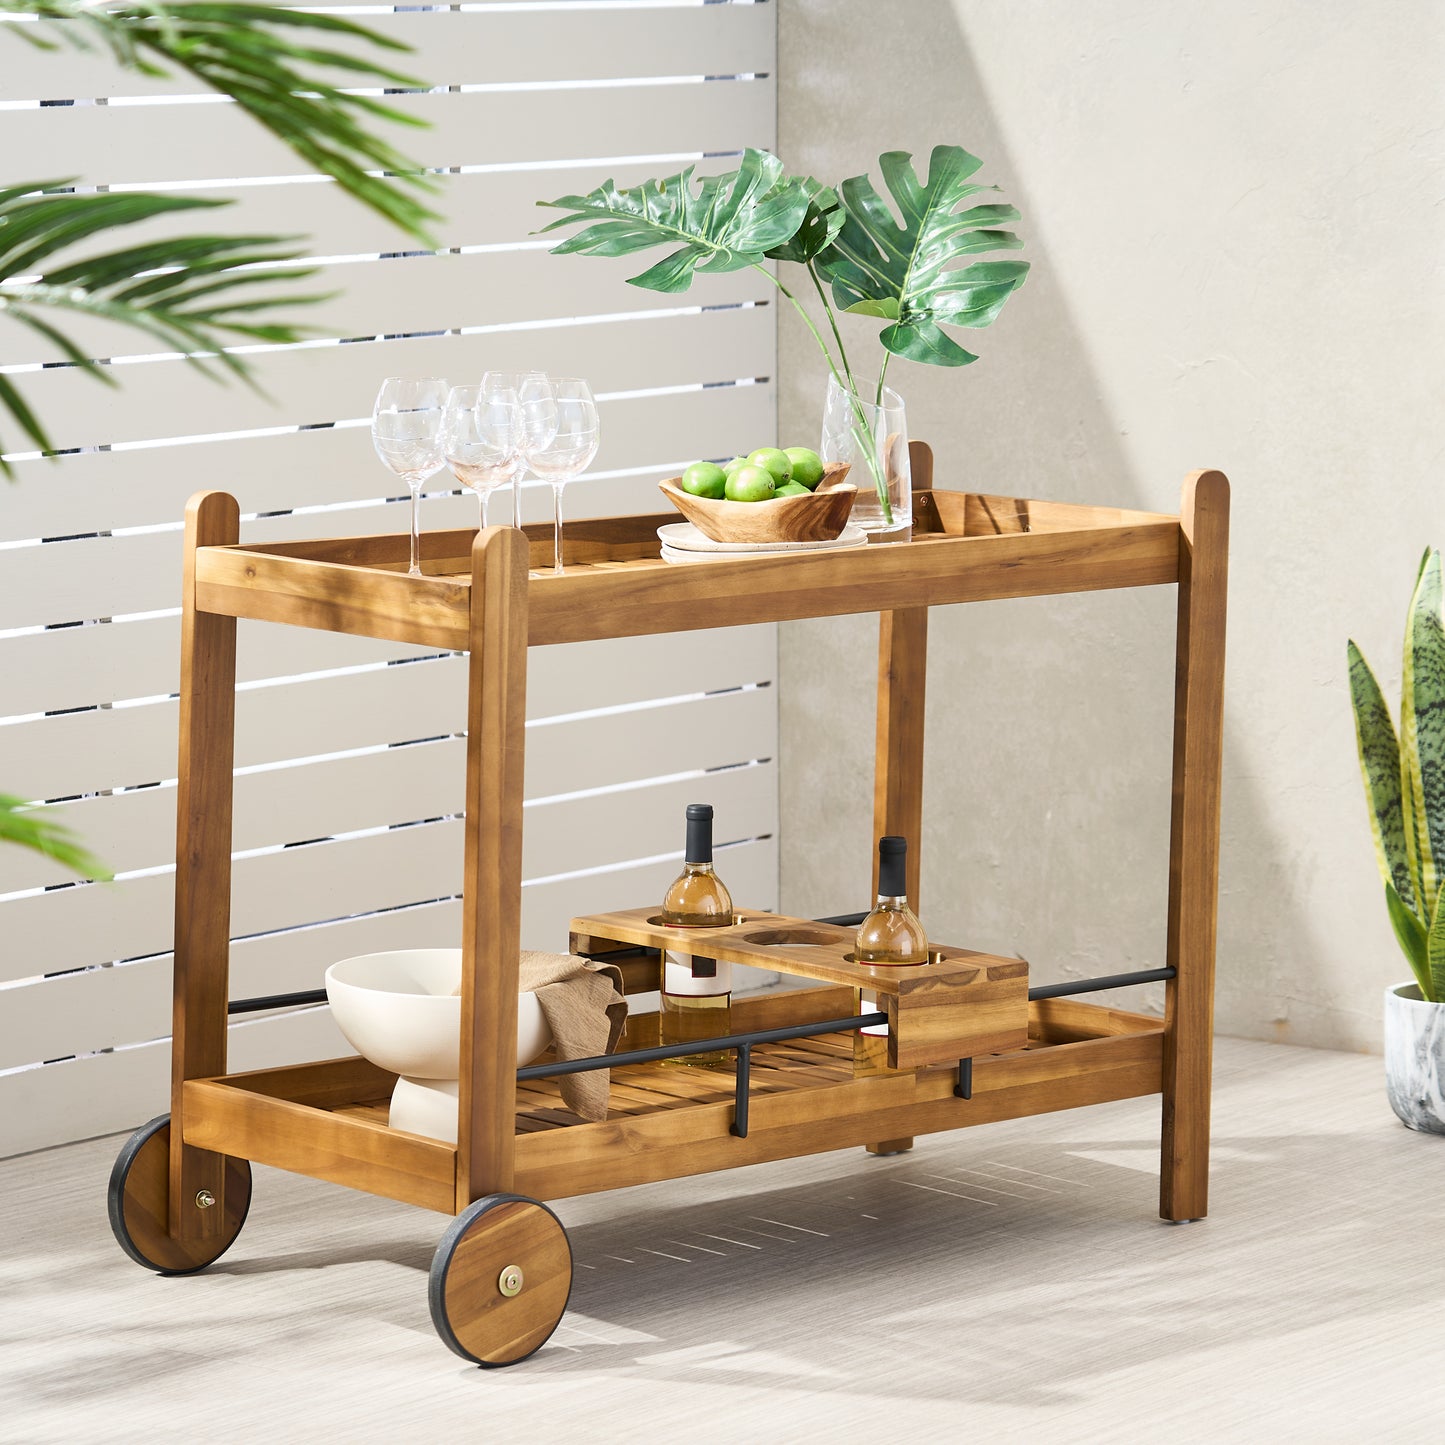 Bonneau Outdoor Acacia Wood 2 Tiered Bar Cart with Bottle Holders, Teak and Black